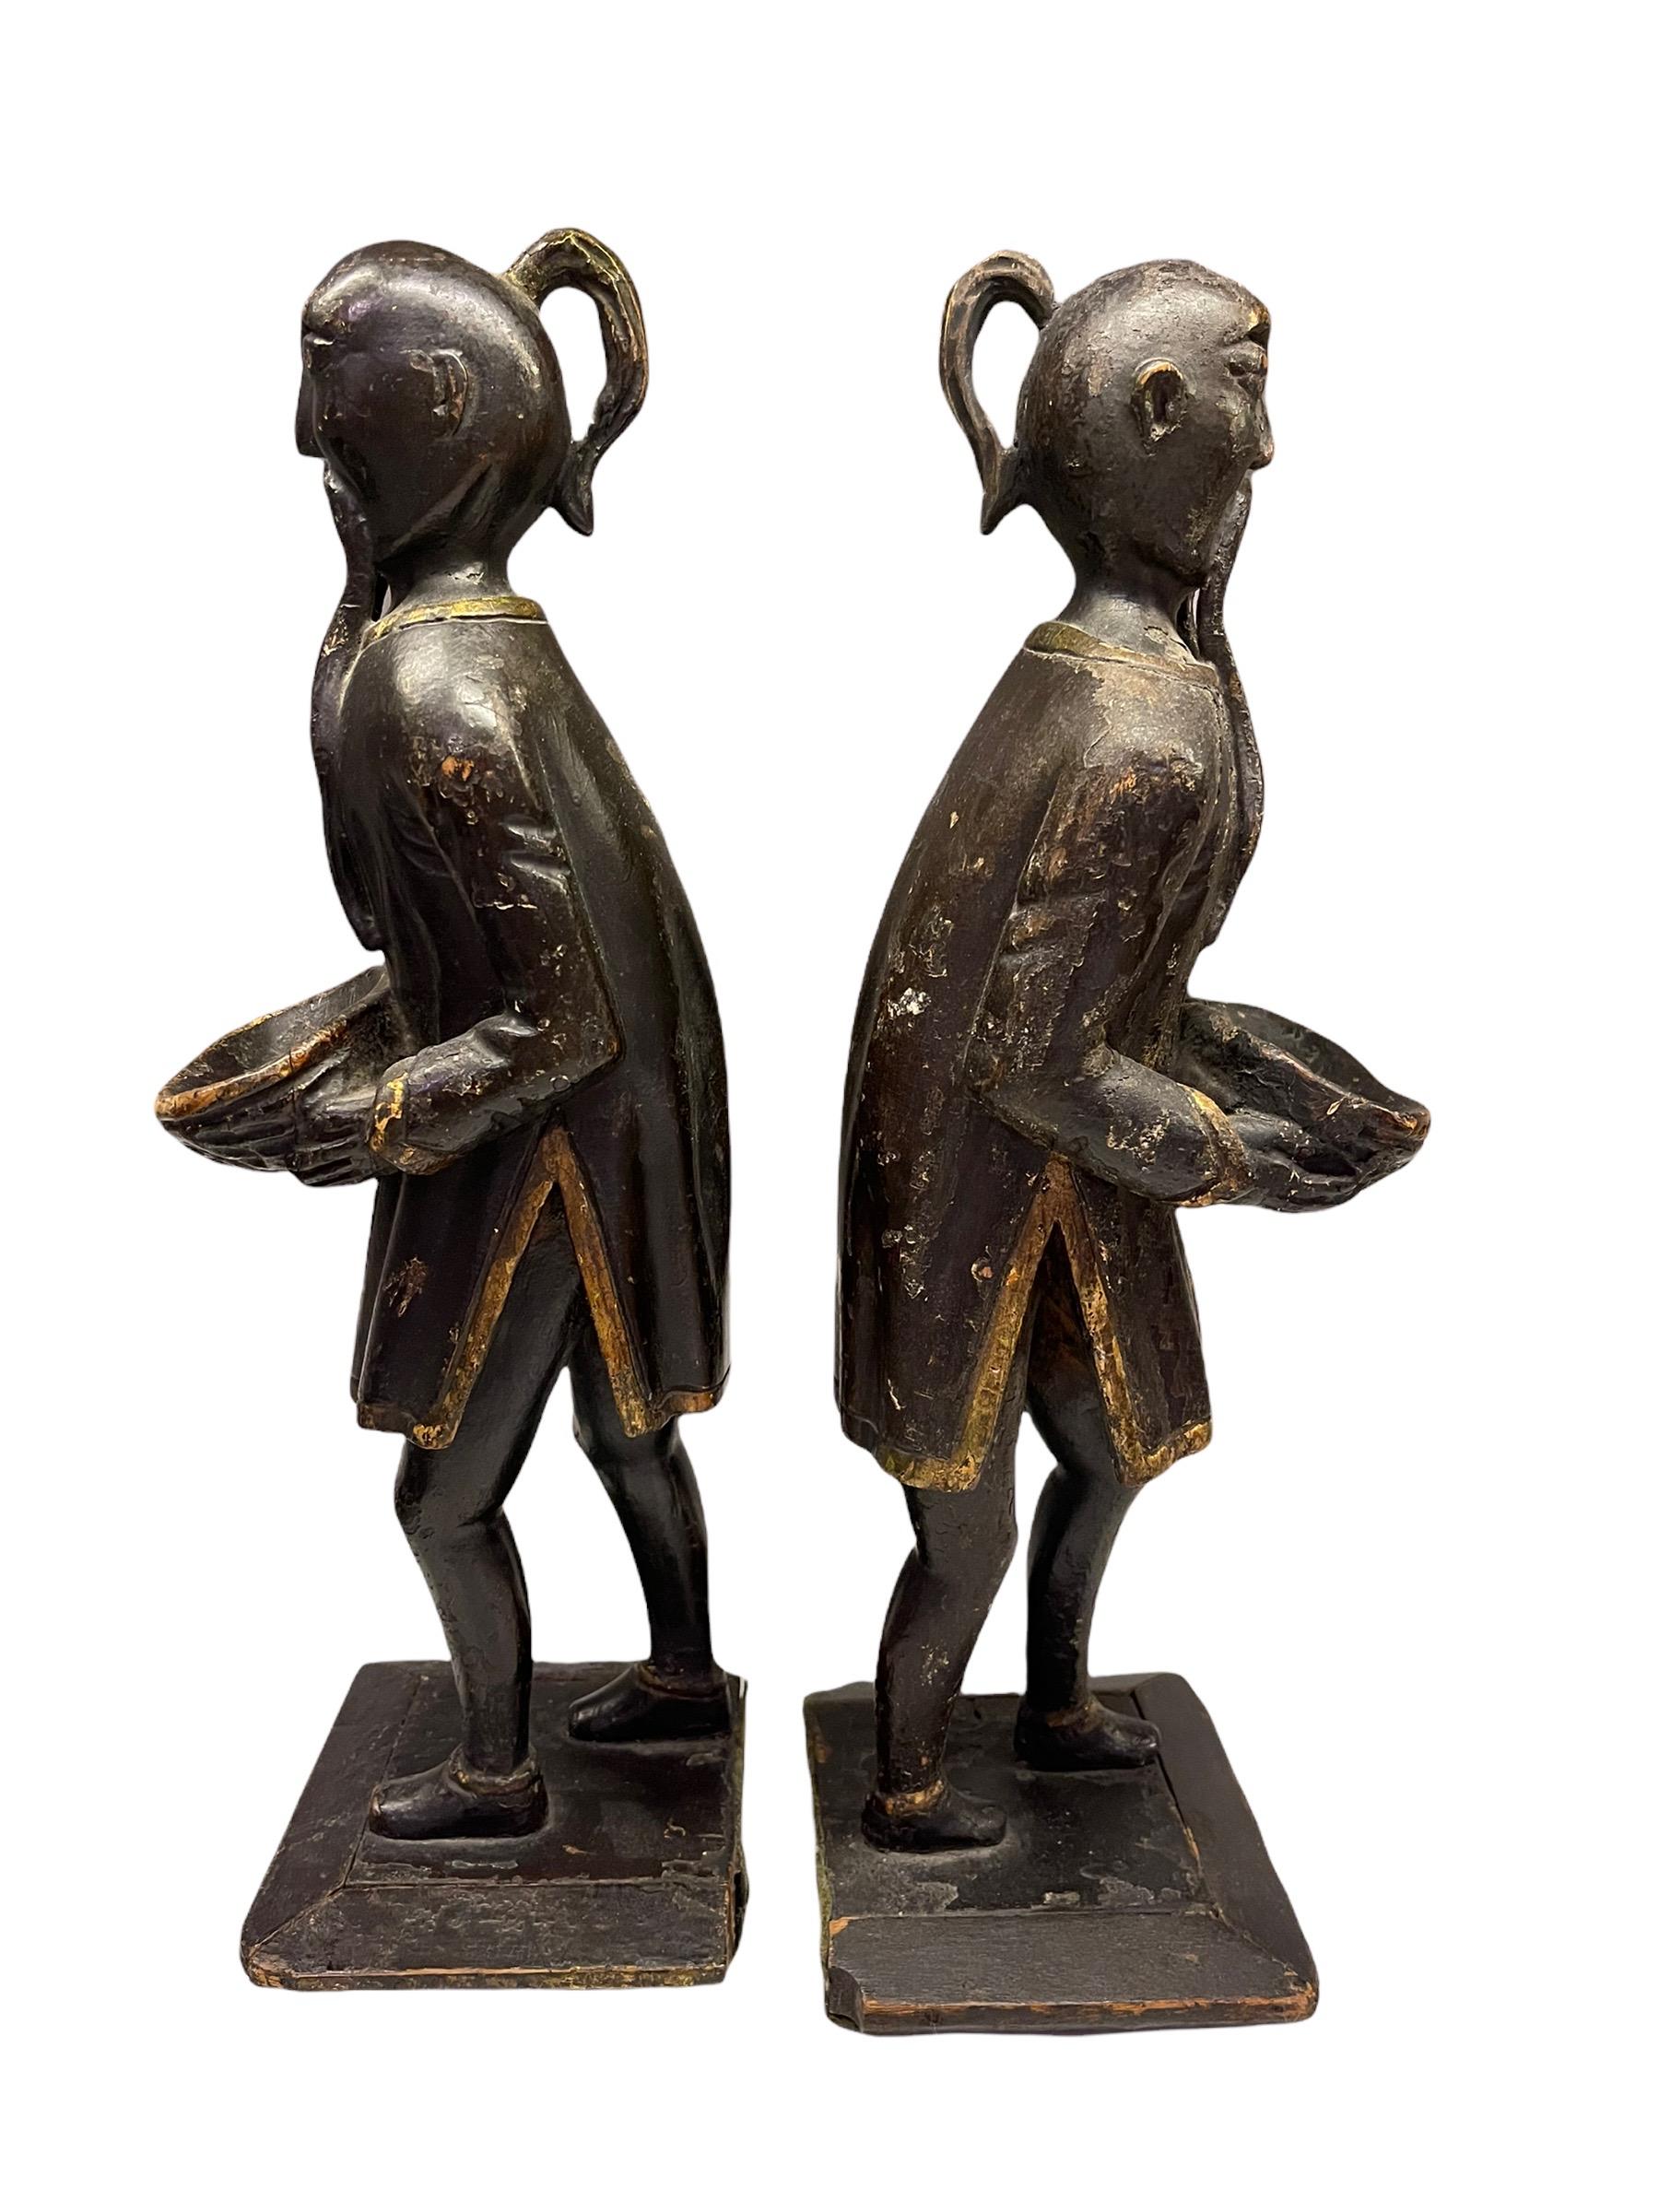 A Pair of 18th Century English Chinoiserie Carved Wood Ring Holders  1